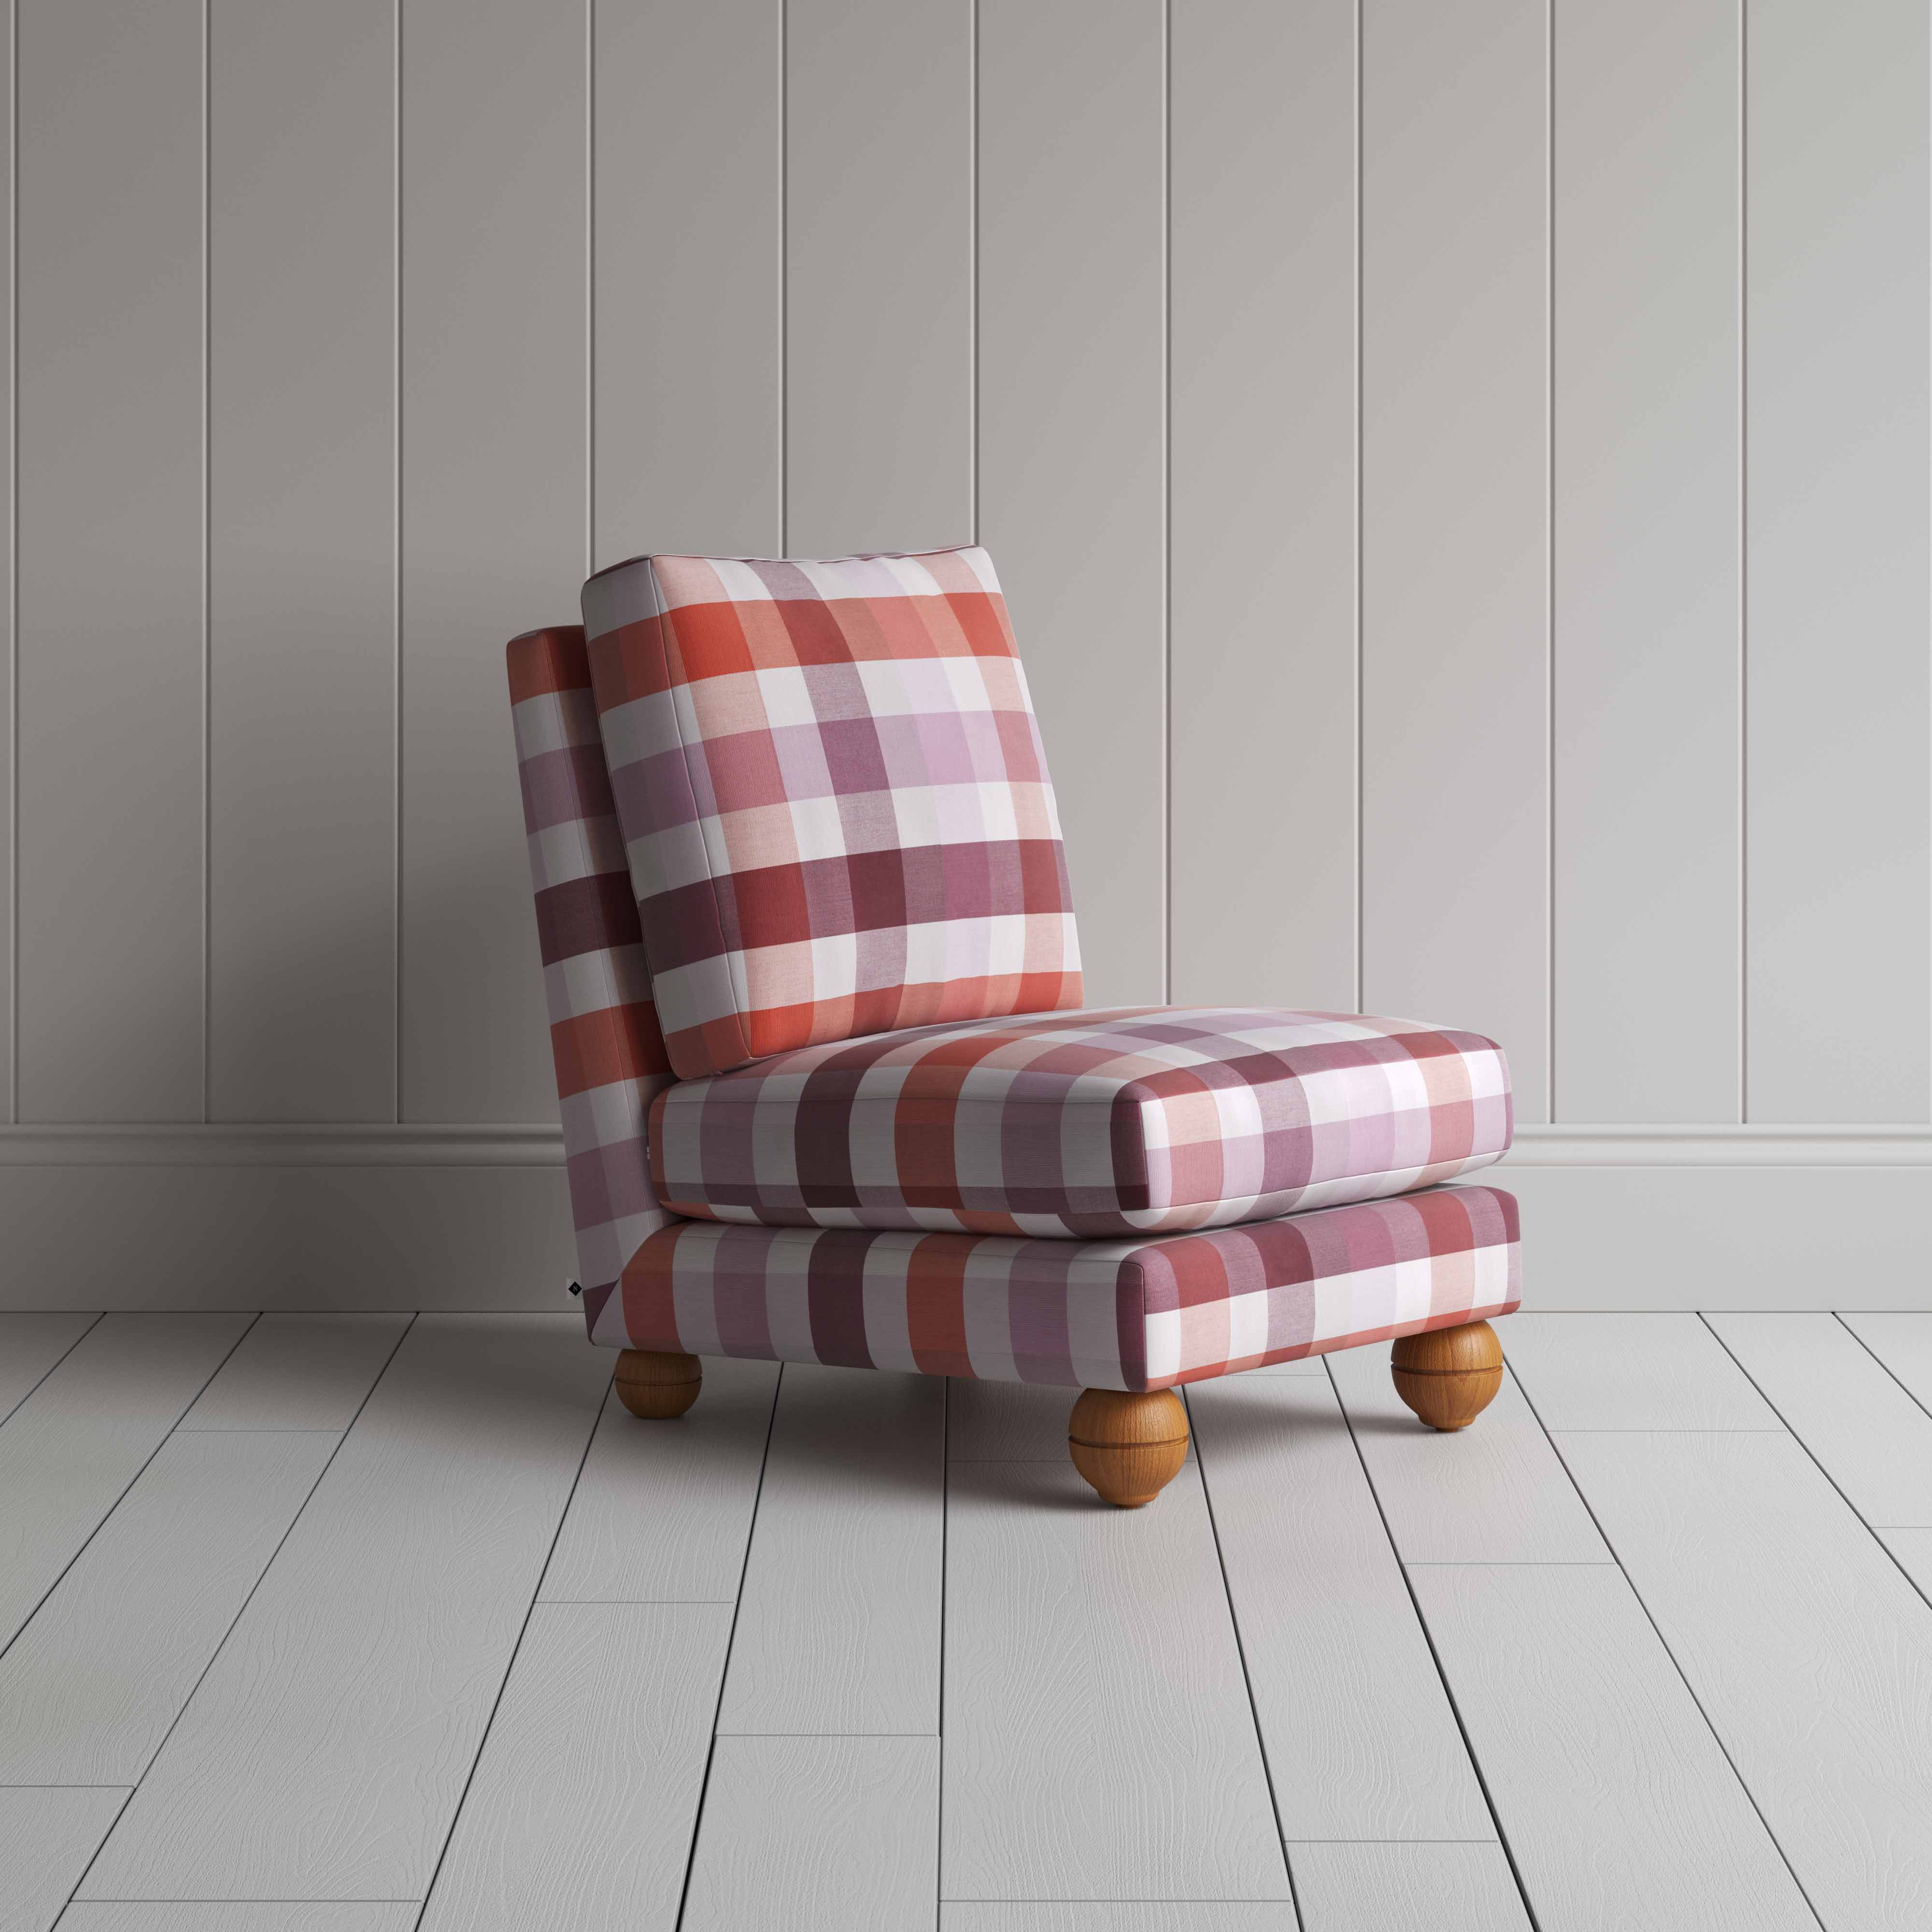  Perch Slipper Armchair in Checkmate Cotton, Berry 